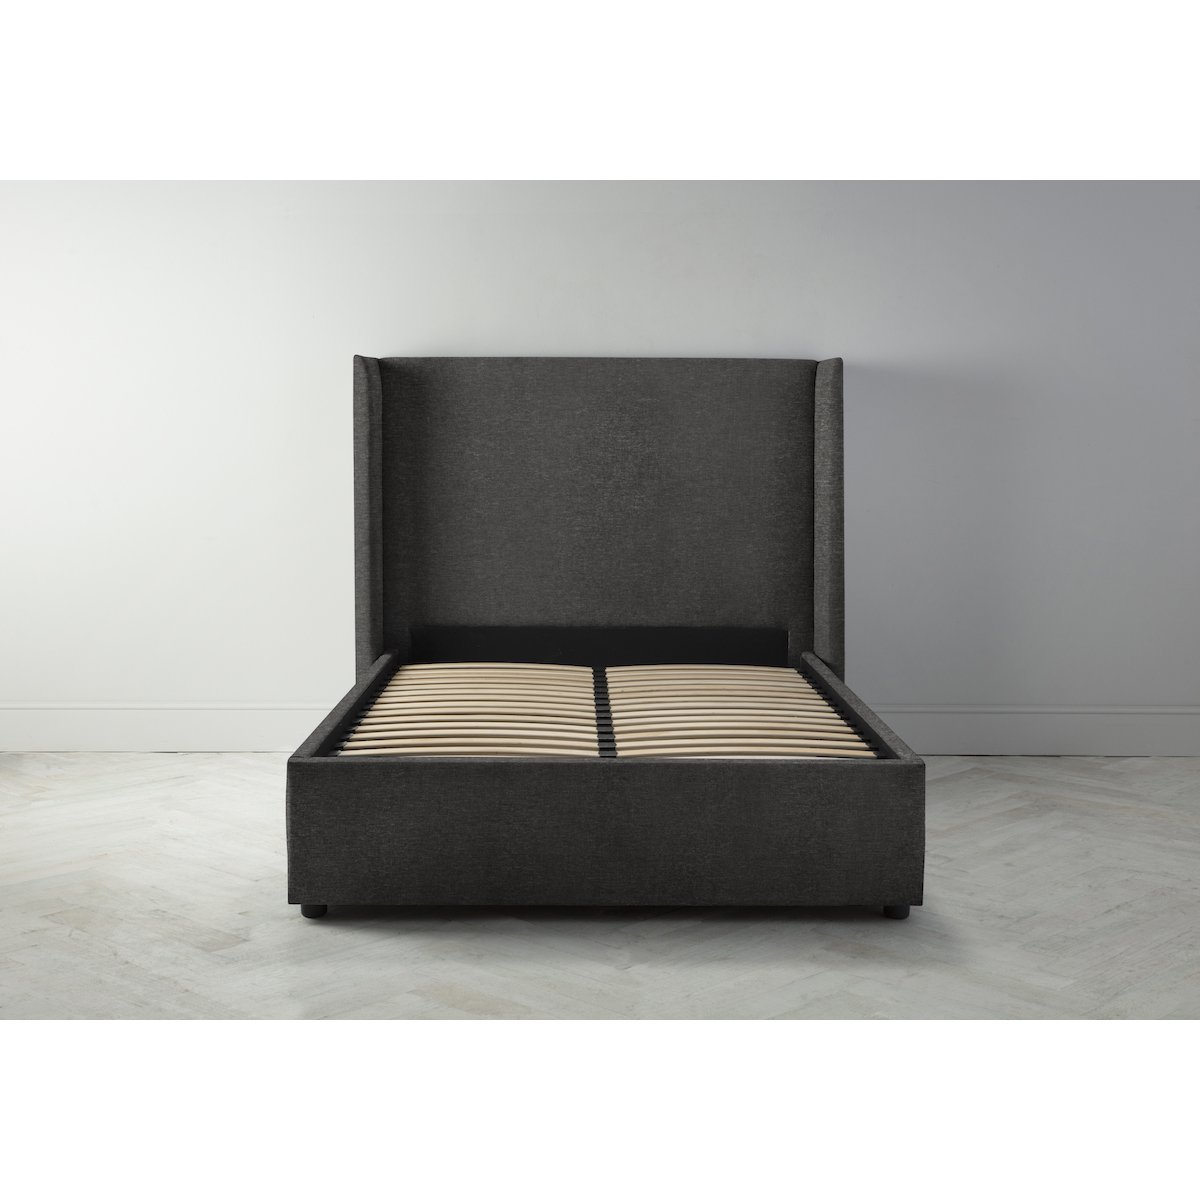 Suzie 6' Super King Bed Frame in Oil Spill